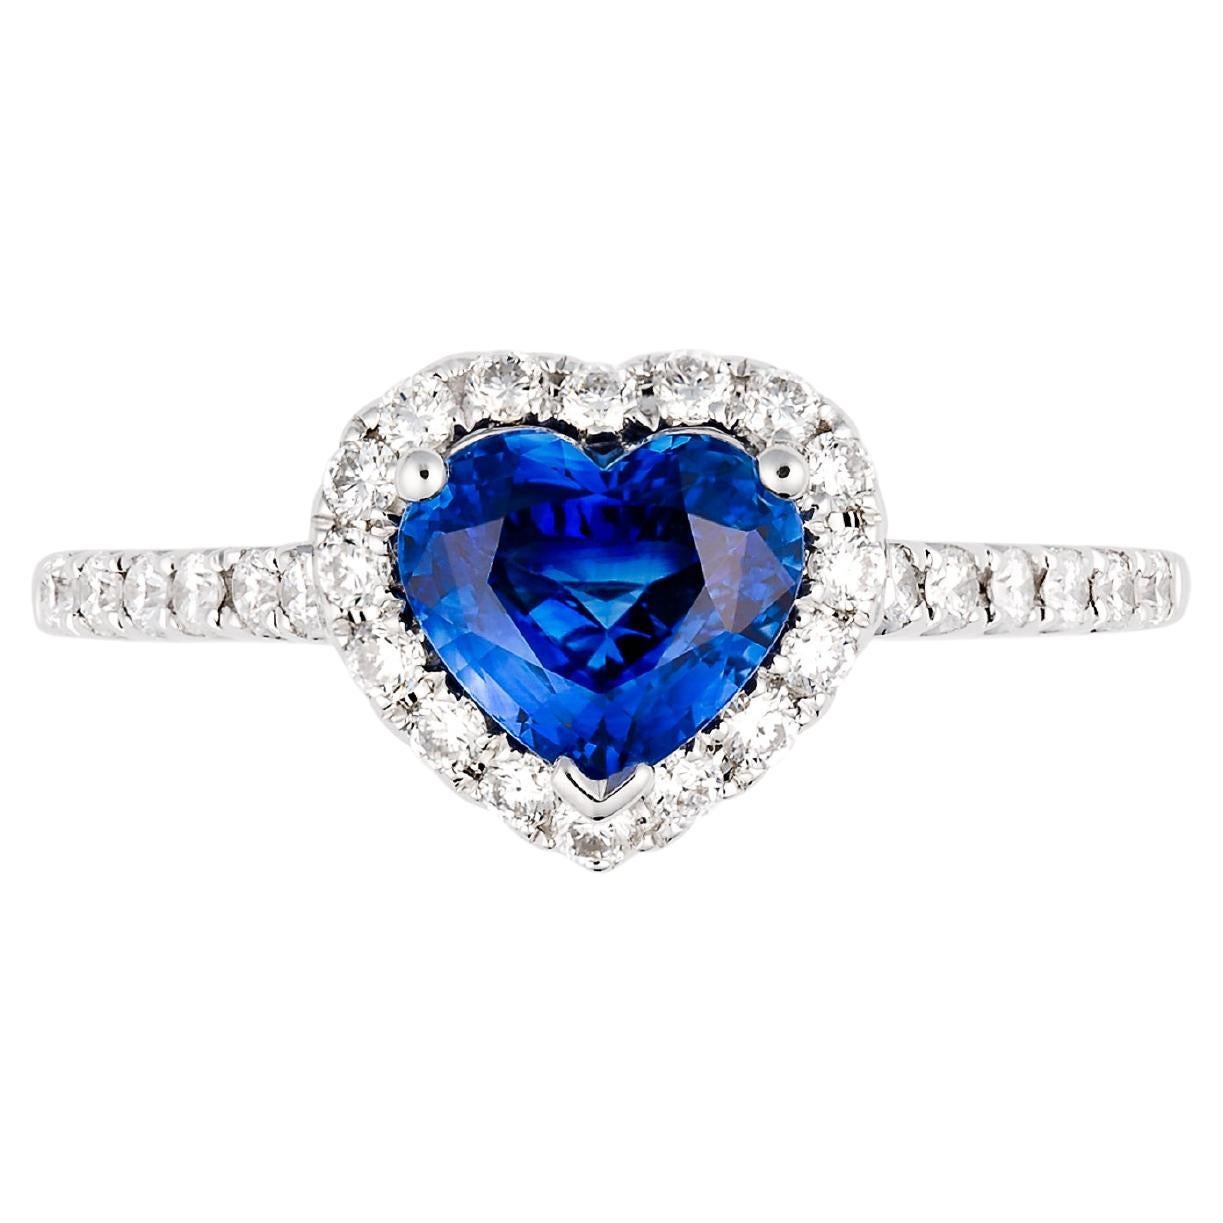 Fancy 1.203ct Heart- Shaped Kashmir Blue Sapphire and Diamond Ring For Sale